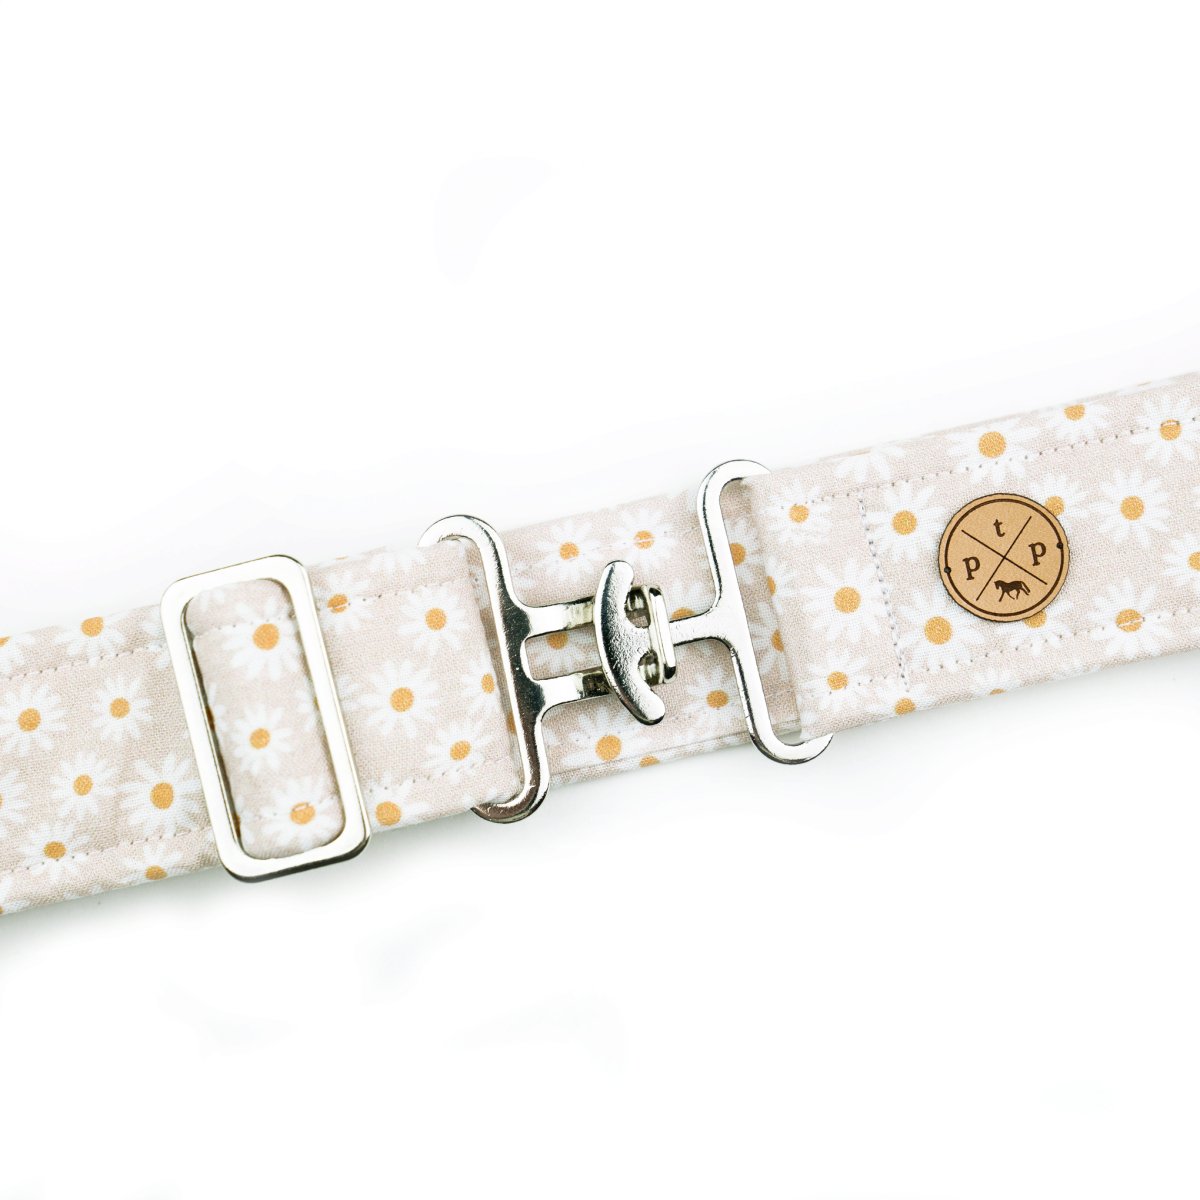 Daisy Chain Belt - Equiluxe Tack